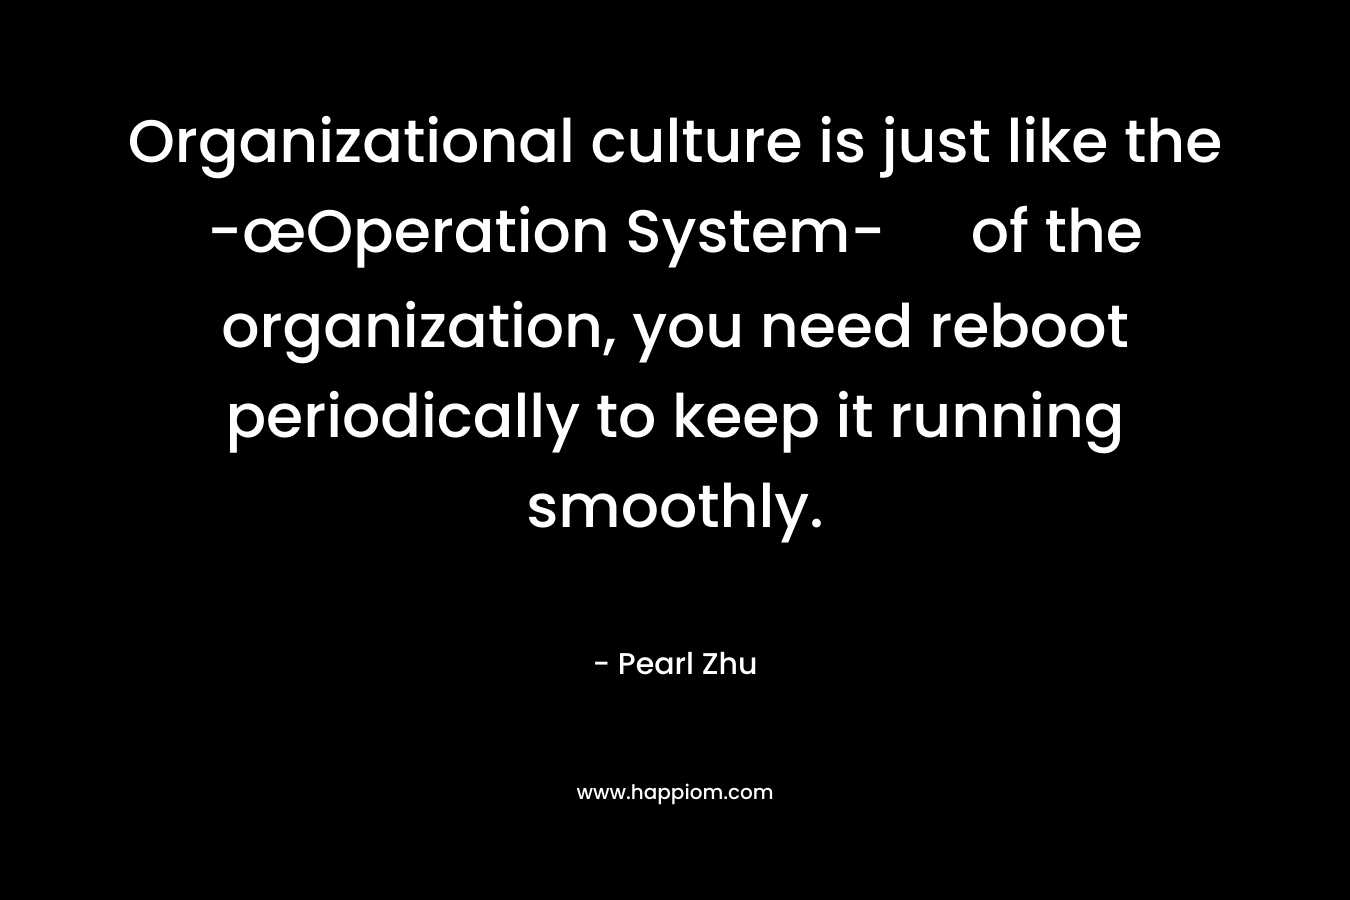 Organizational culture is just like the -œOperation System- of the organization, you need reboot periodically to keep it running smoothly.